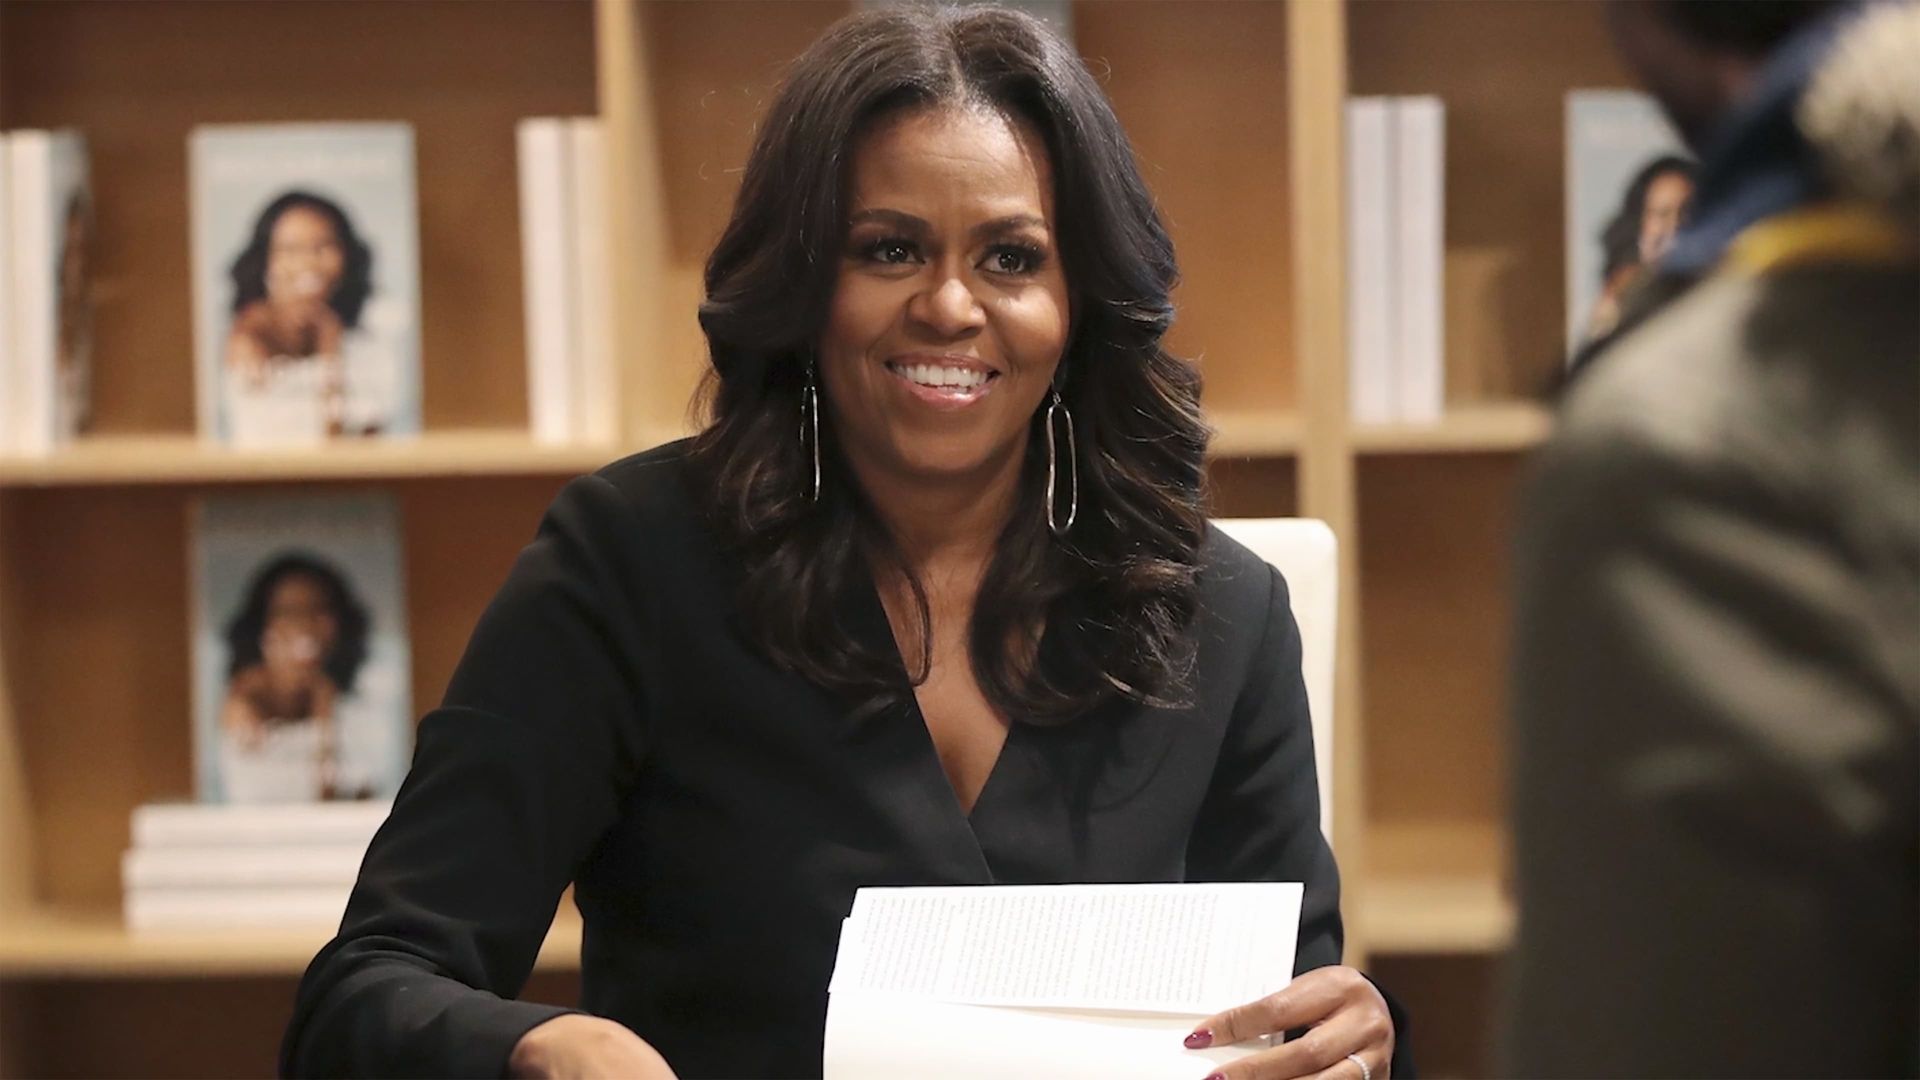 Michelle Obama: Life After the White House background